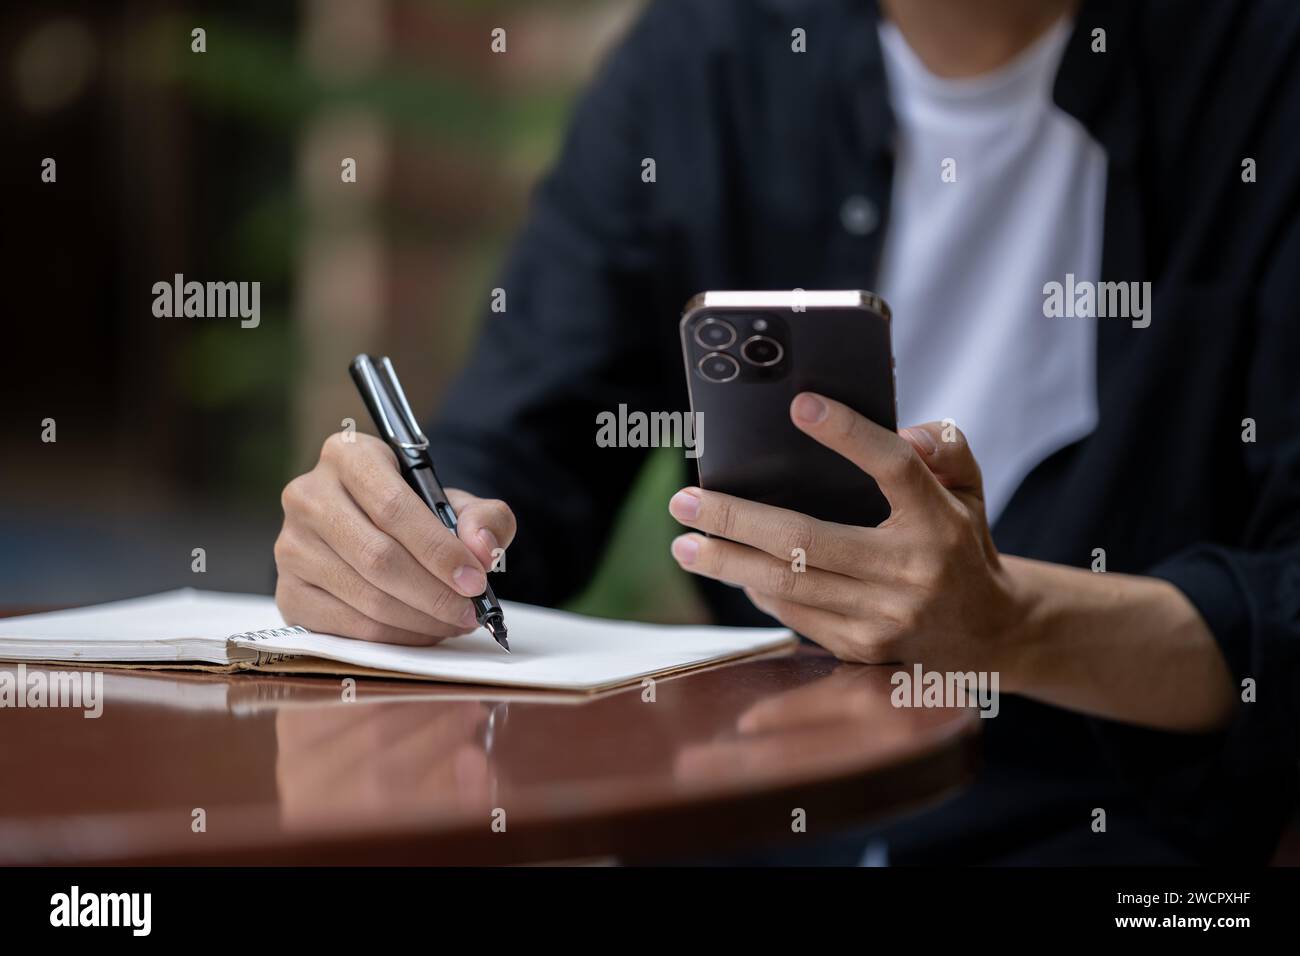 Close-up image of a man using his smartphone and taking notes in his book at a table in a coffee shop. Lifestyle concept Stock Photo